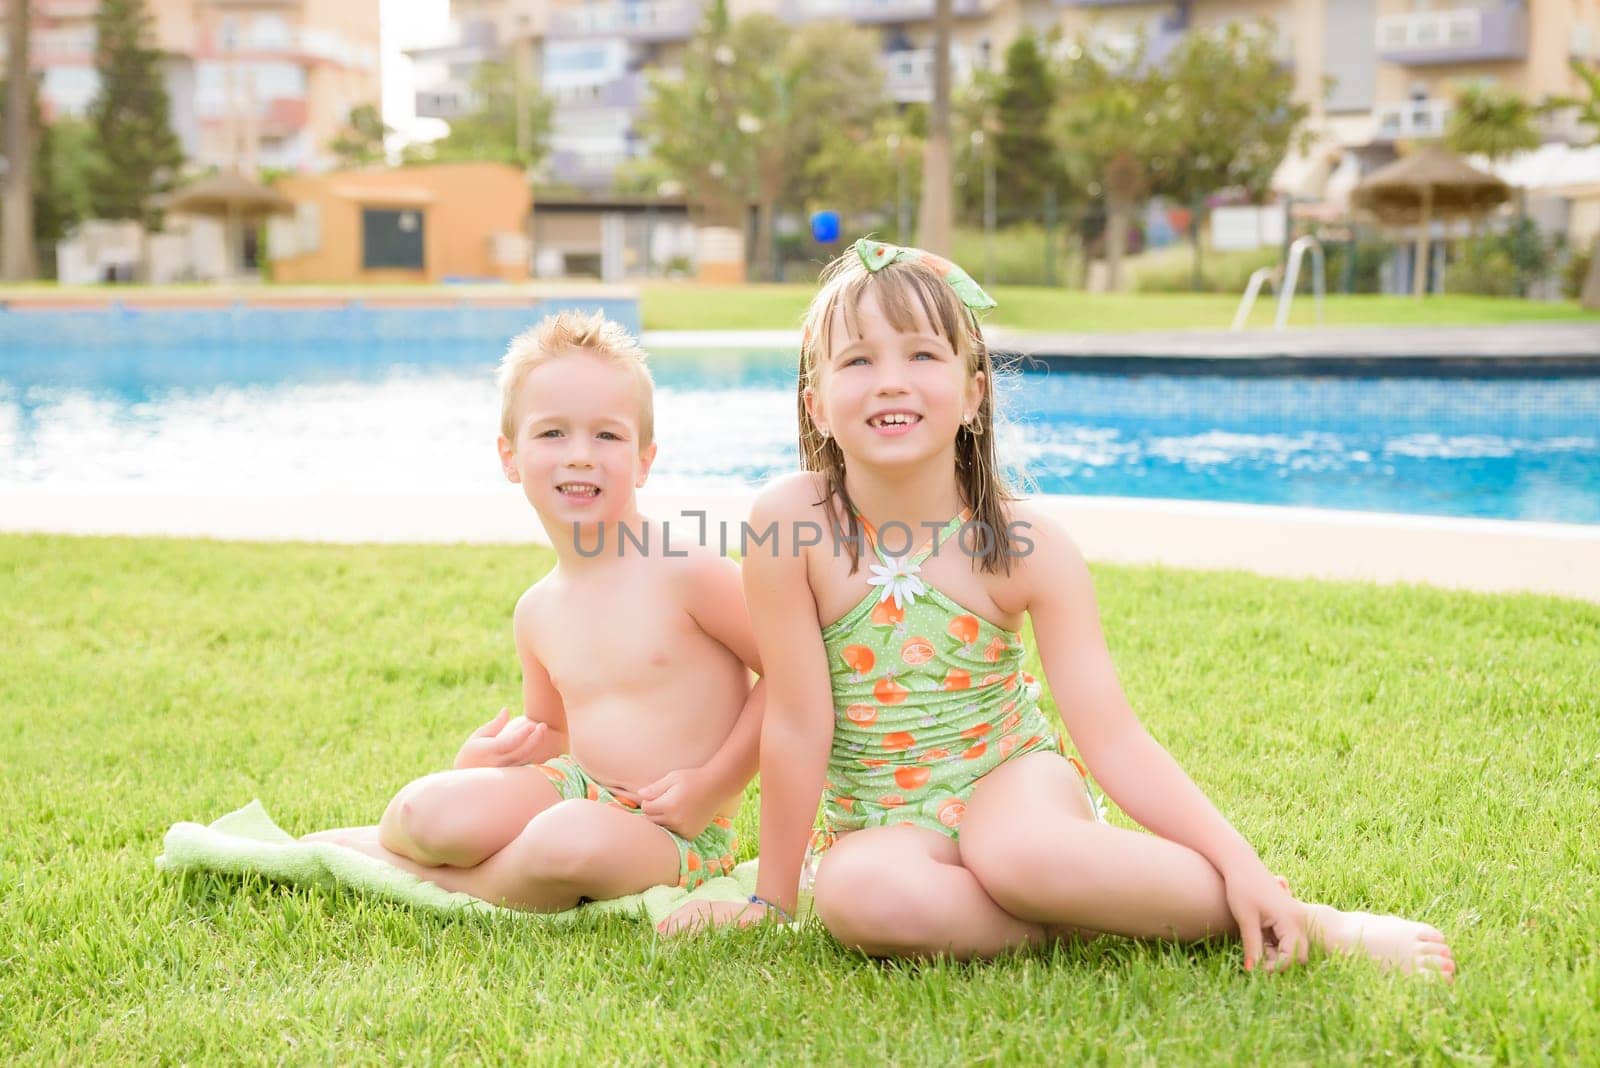 Theme is a children's summer vacation. Two Caucasian children, brother and sister, sit in a perched round pool with water in the yard of the green grass in a bathing suit and joy happiness smile.